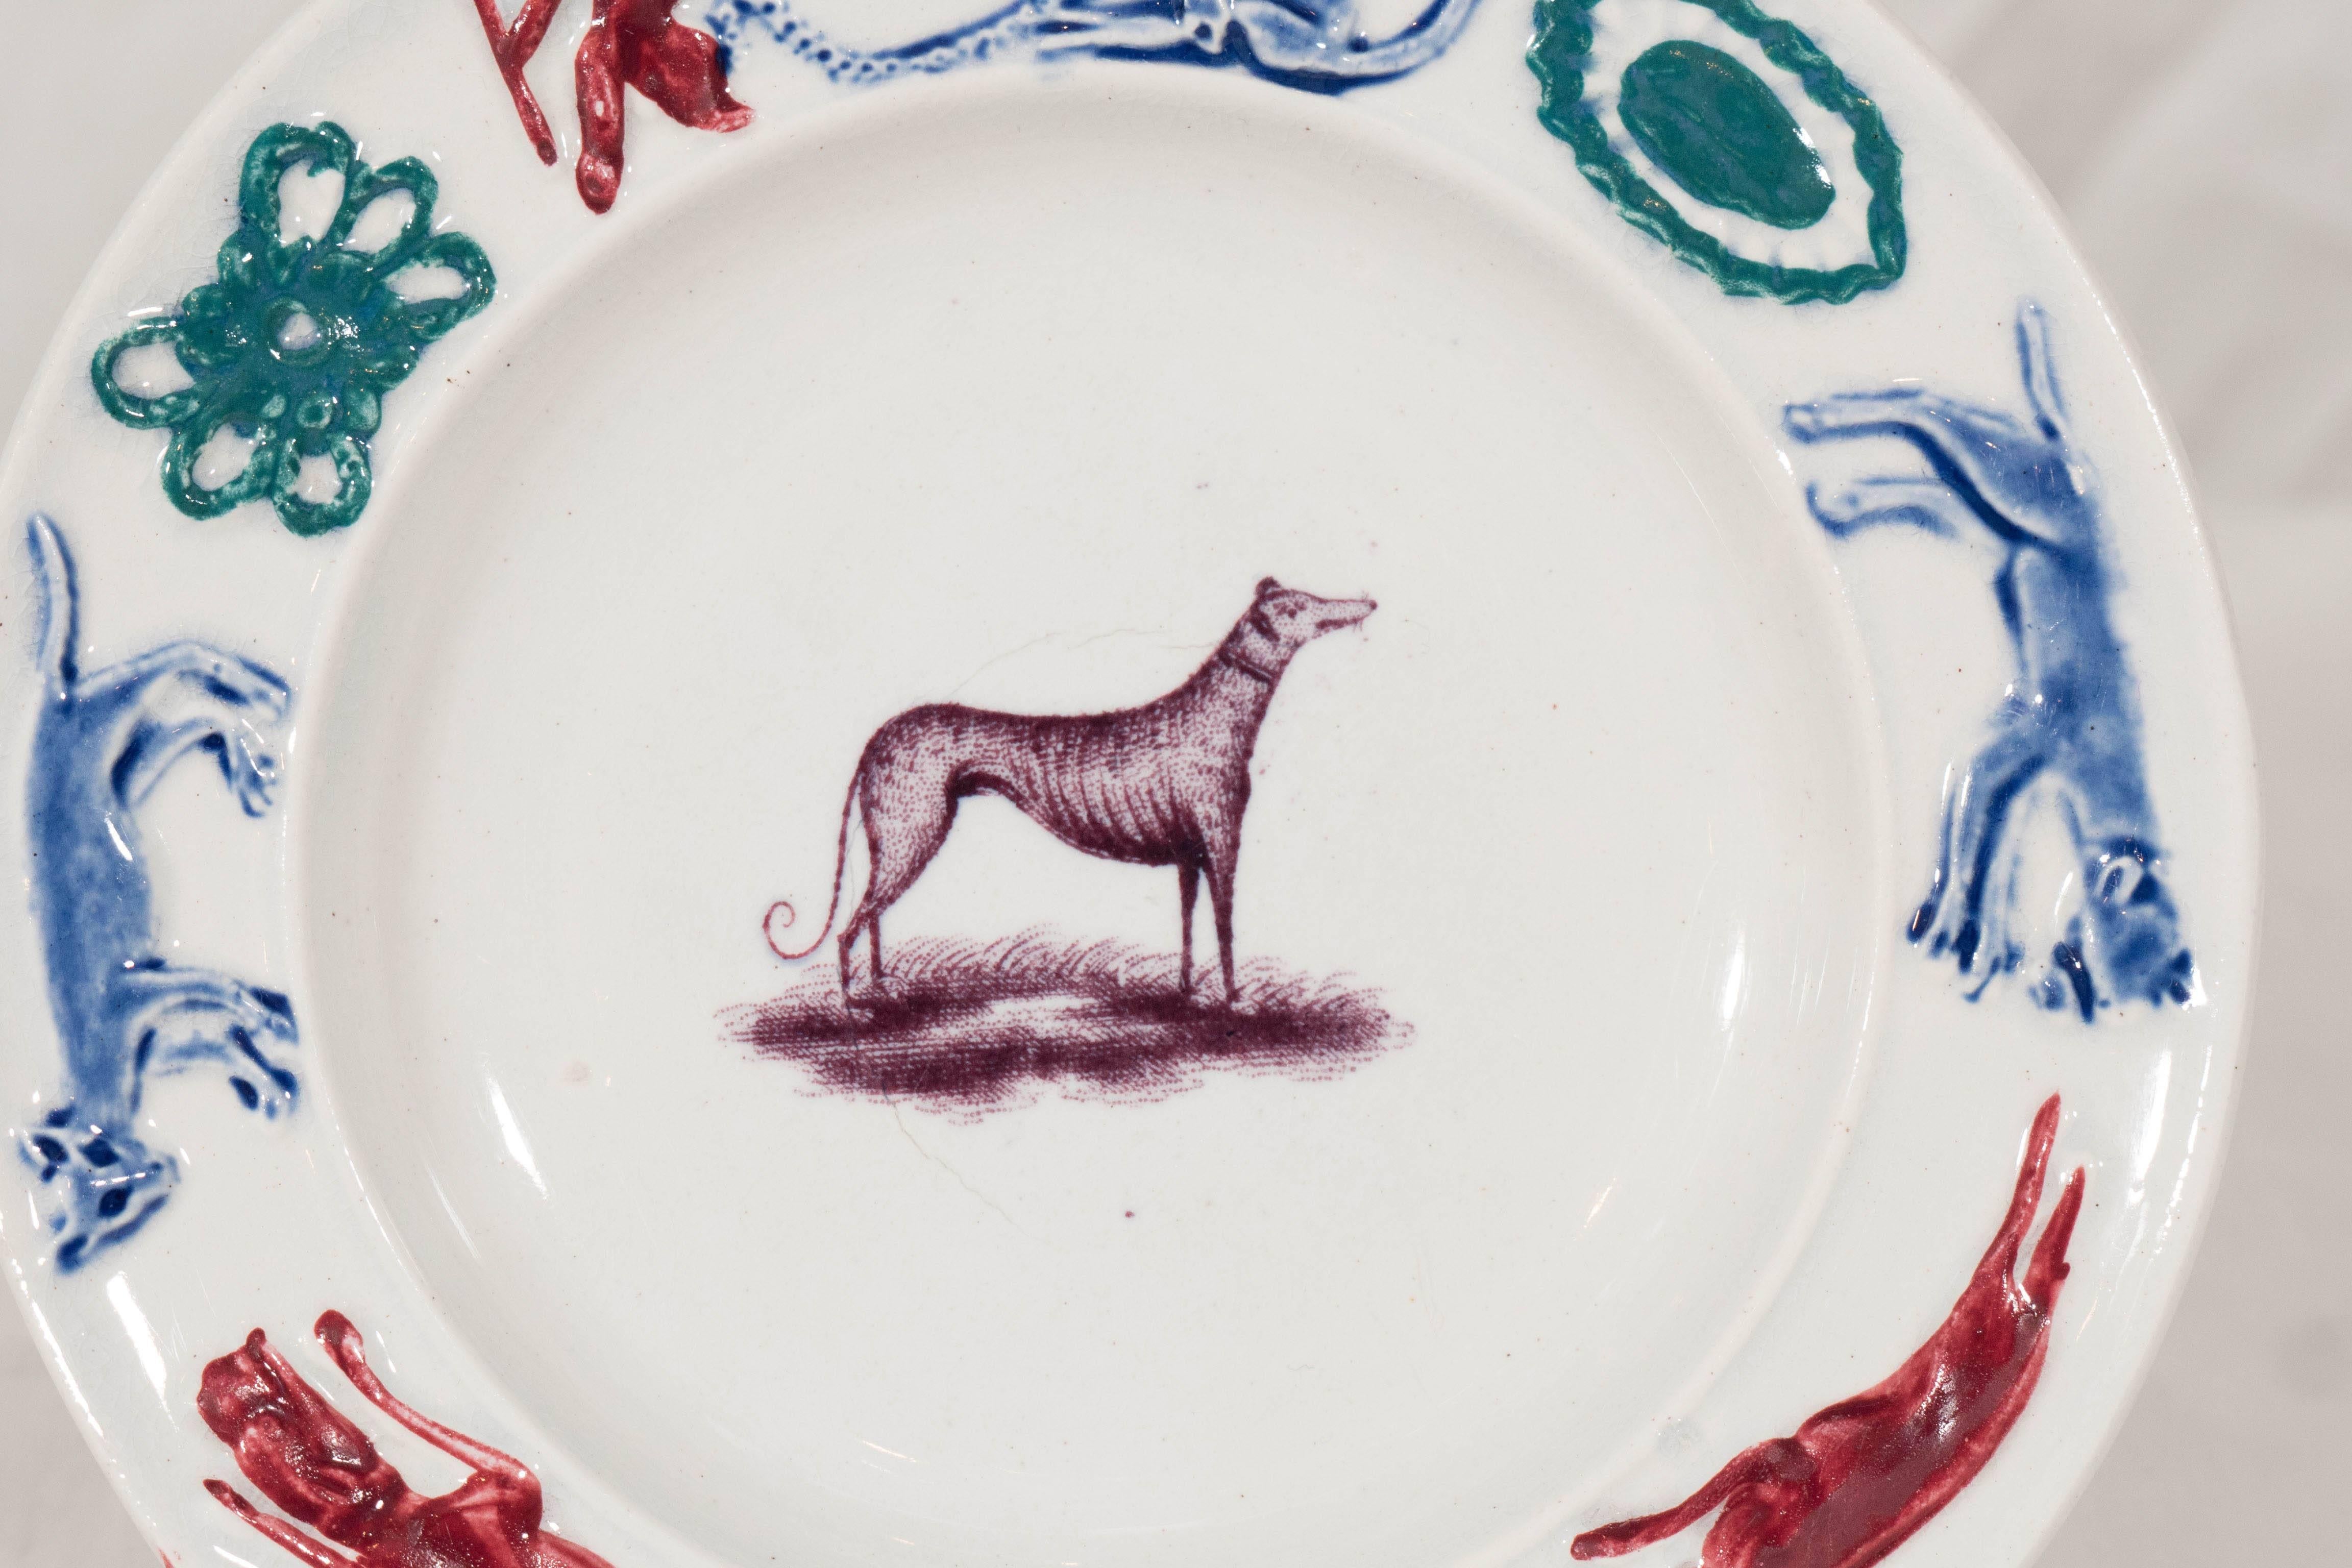 Children and dogs are a natural combination. This wonderful Adams child's plate shows a greyhound in the center around which are colorful figures and decorations including: a blue monkey and his red trainer, a  blue raccoon, and a red fox.
